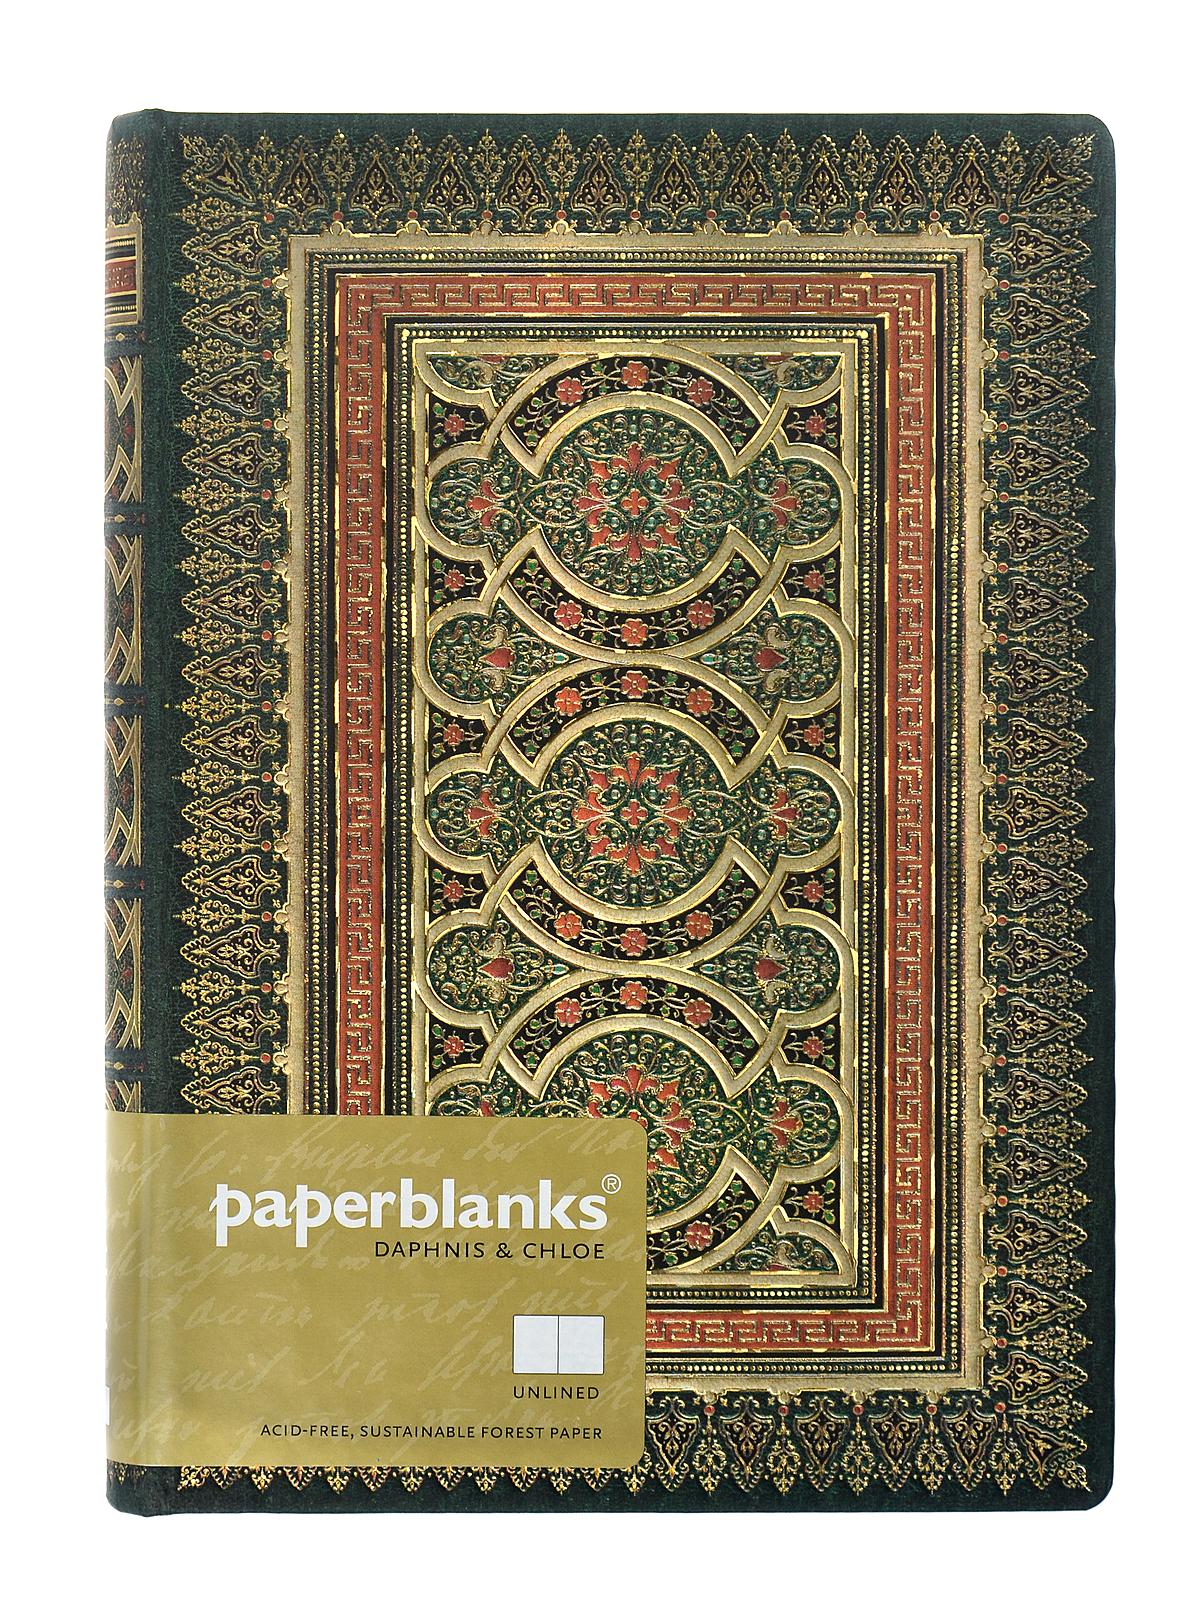 Daphnis & Chloe Daphnis Midi, 5 In. X 7 In. 240 Pages, Unlined